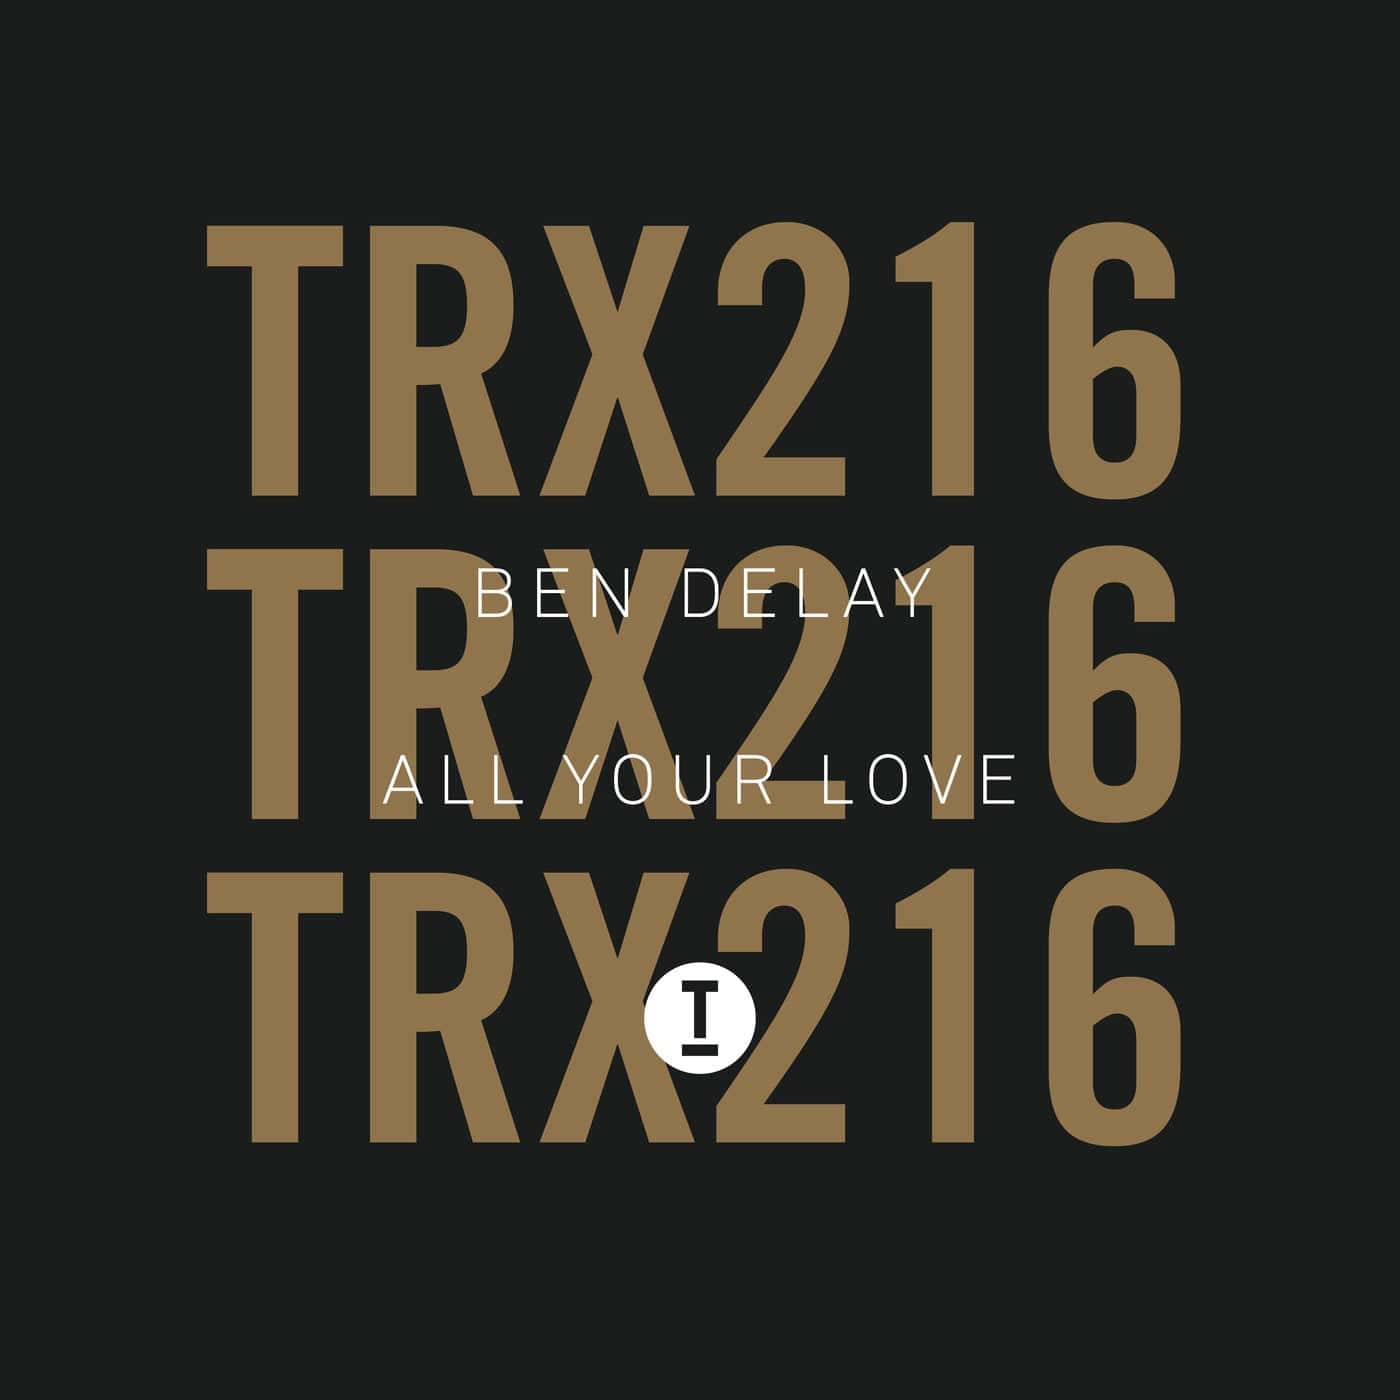 Download All Your Love [TRX21601Z] on Electrobuzz